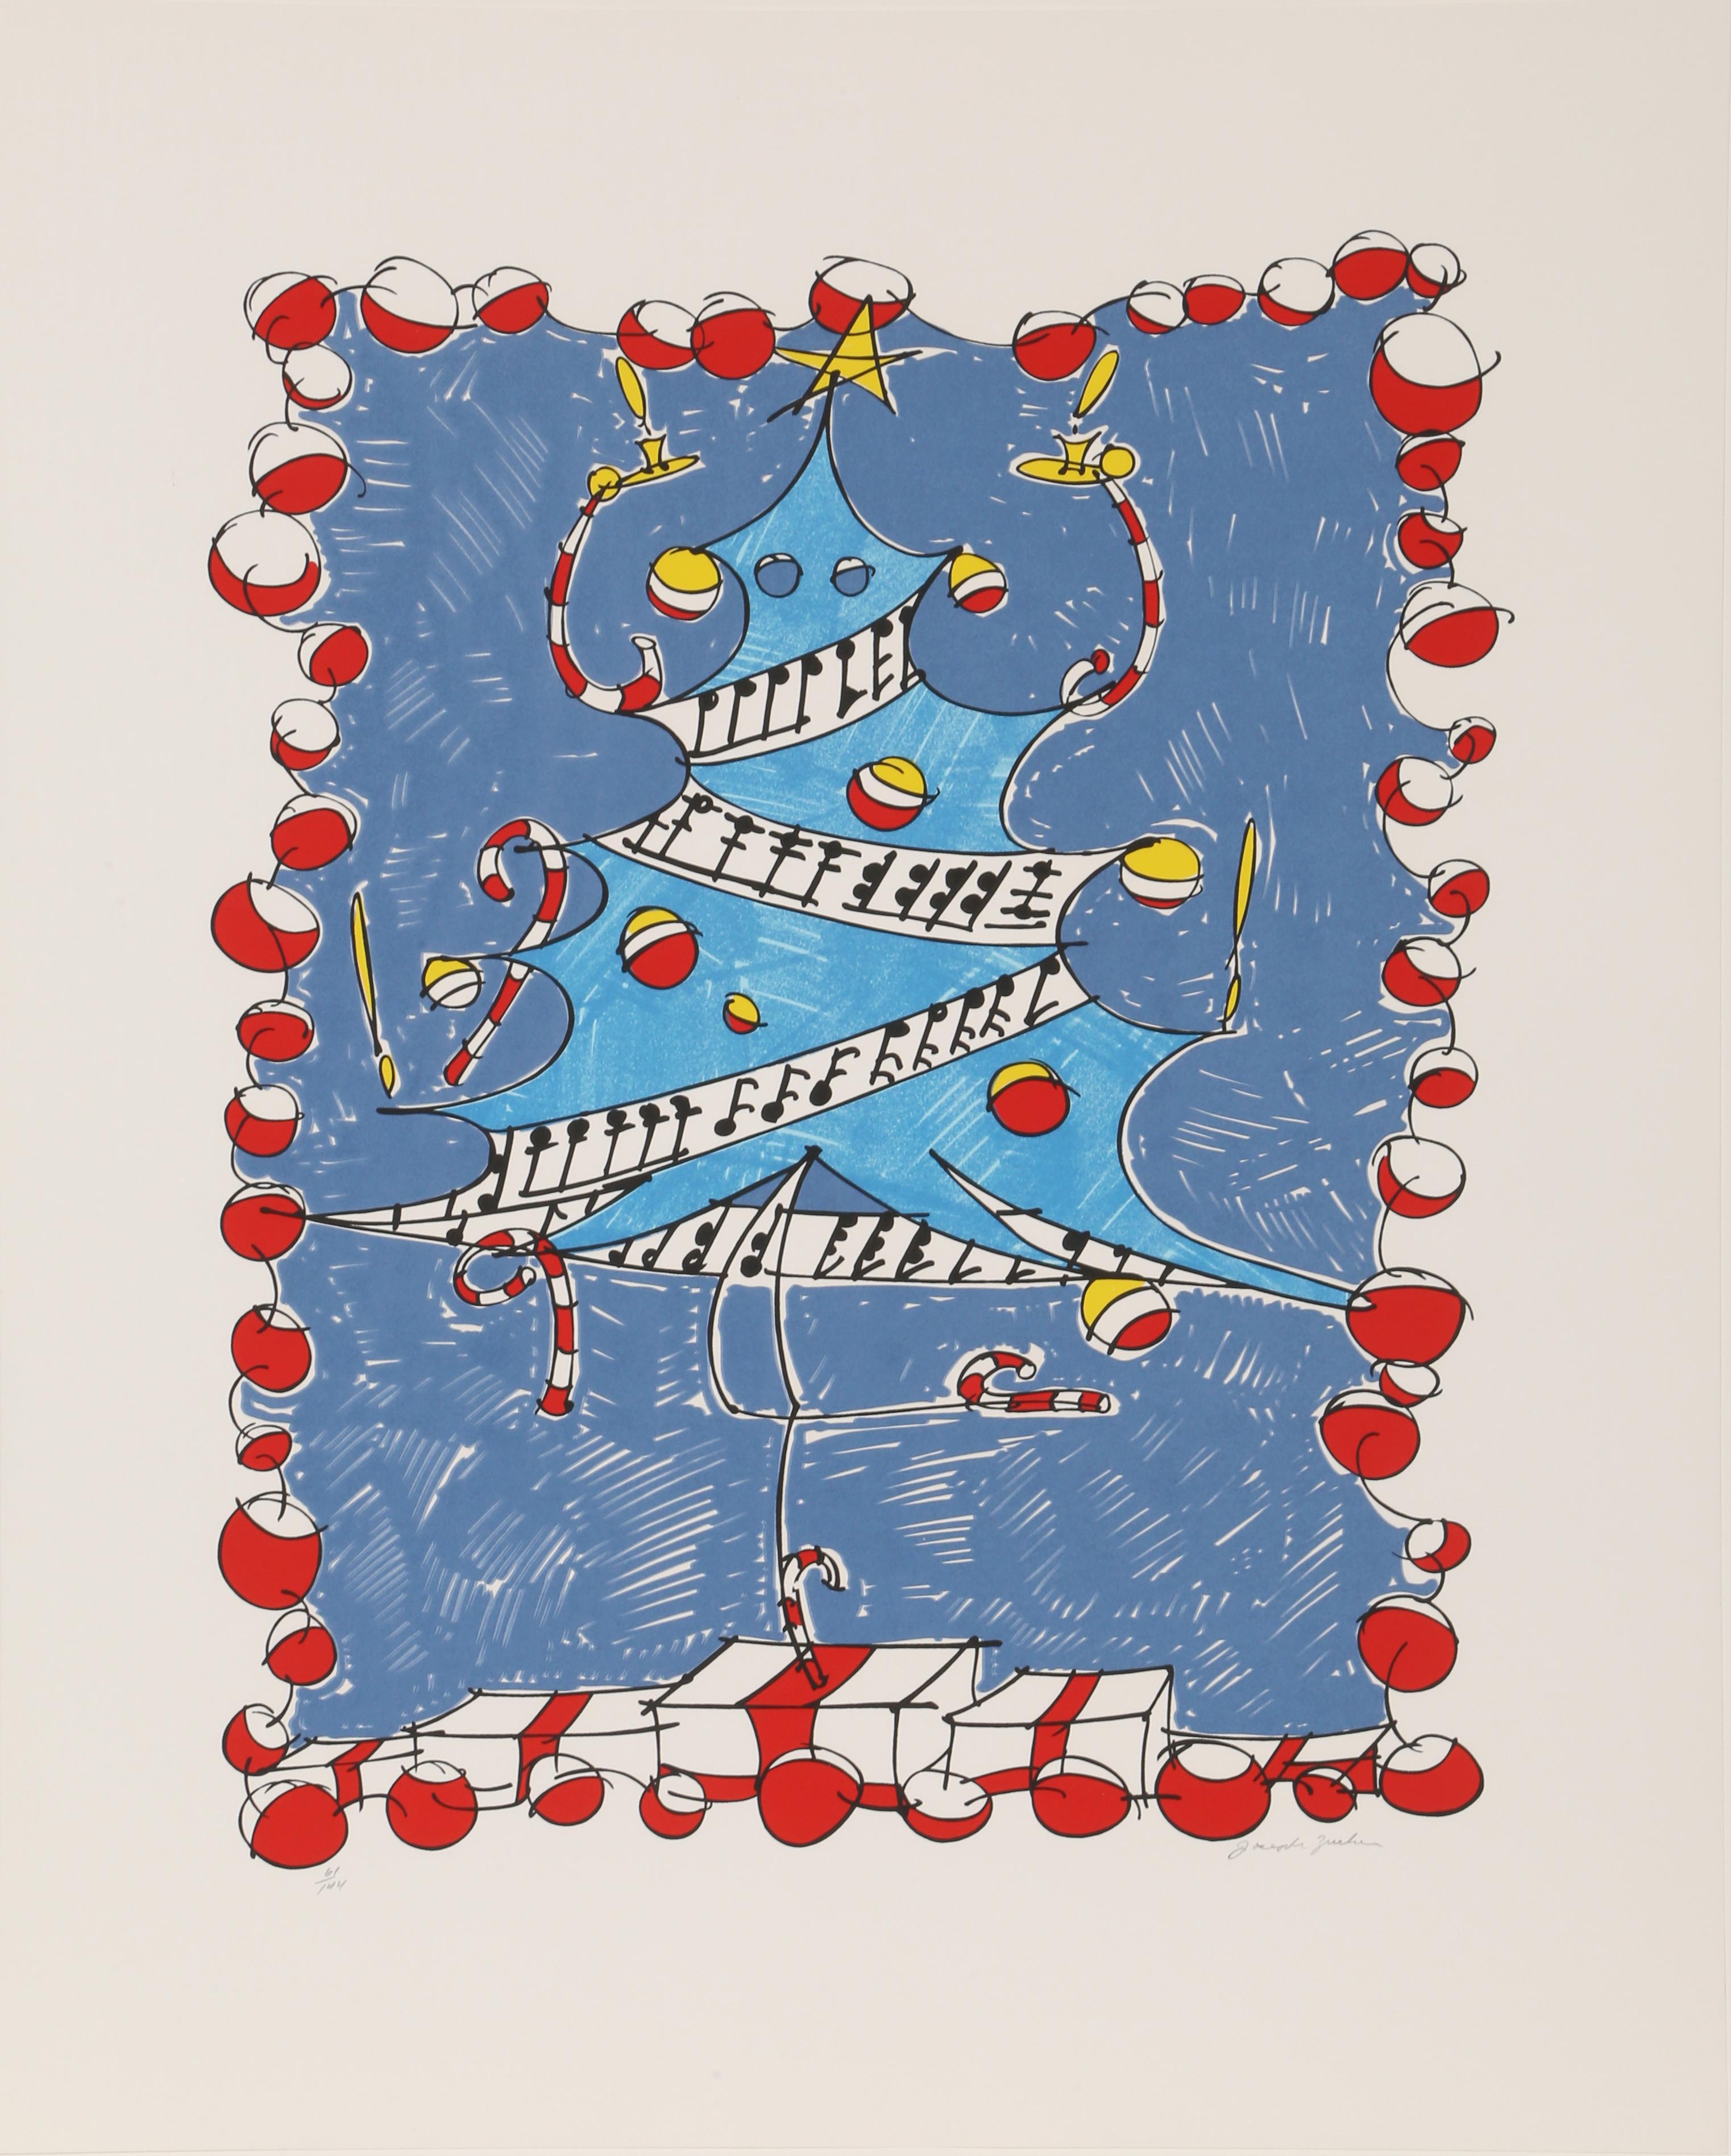 Artist: Joe Zucker, American (1941 -  )
Title: Untitled (Christmas Tree)
Year: 1979
Medium: Screenprint, signed and numbered in pencil
Edition: 61/144
Image Size: 23 x 18 inches
Sheet Size: 31 x 25 inches

Printer: Fine Creations, Inc., New